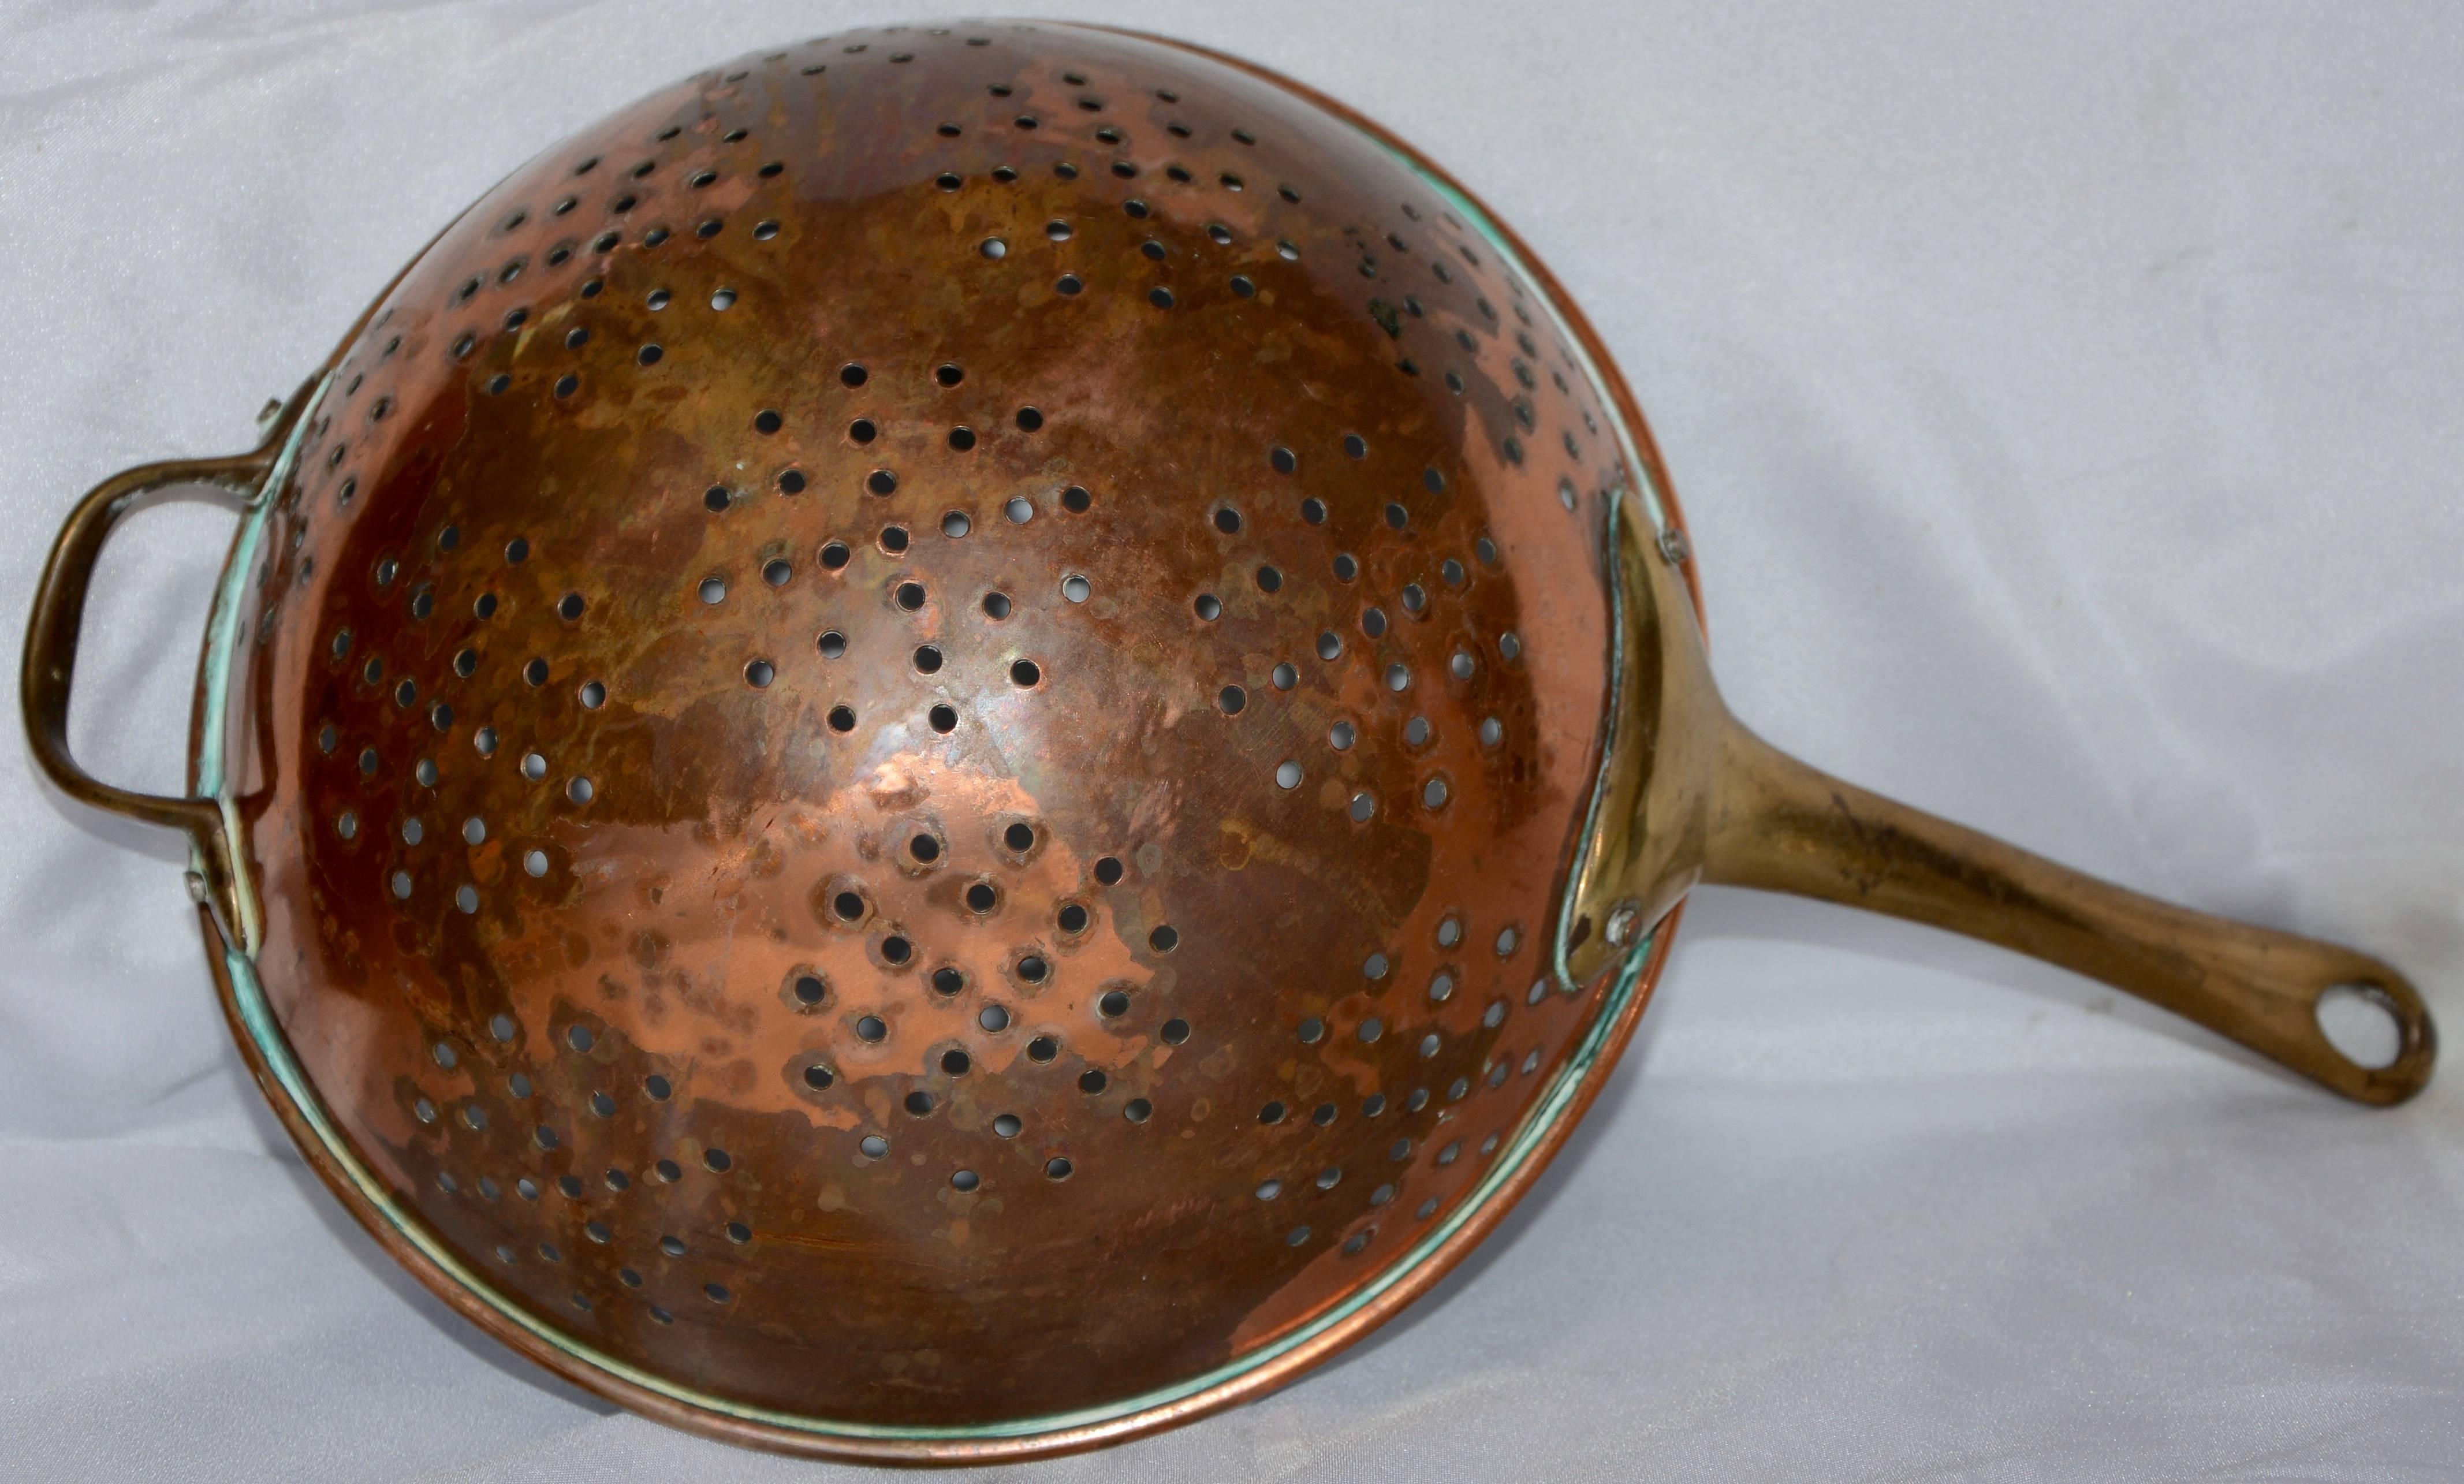 Hand-forged brass handles accent this copper colander from France. The inside is lined with zinc and an array of holes make an interesting design.